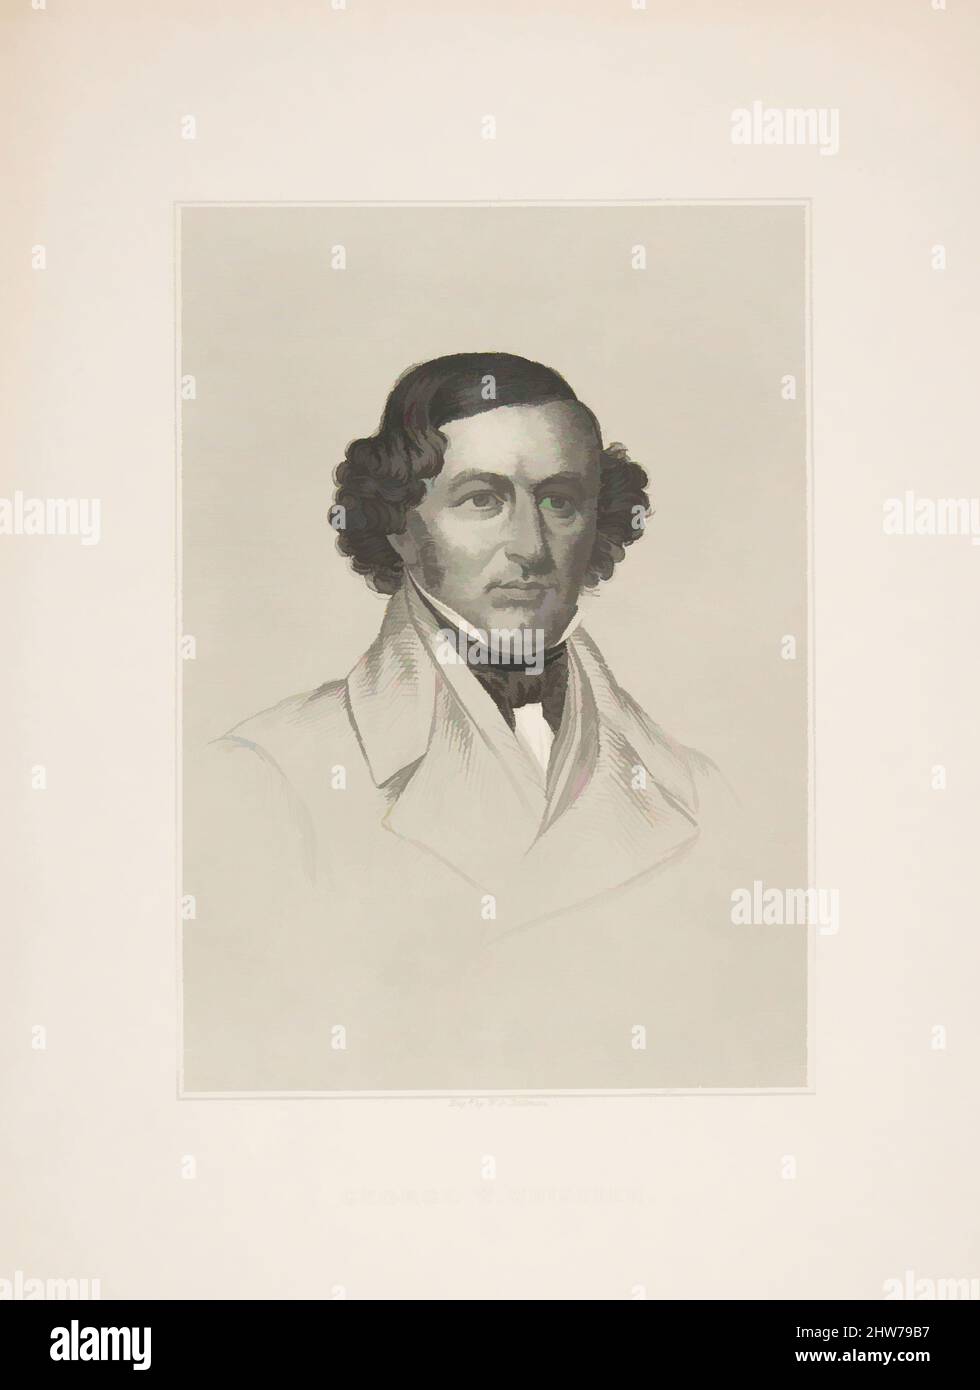 Art inspired by George W. Whistler, 1800–1849, 1841–60, Engraving, sheet: 9 5/8 x 7 in. (24.4 x 17.8 cm), Prints, William G. Jackman (British, active America ca. 1841–1860, Classic works modernized by Artotop with a splash of modernity. Shapes, color and value, eye-catching visual impact on art. Emotions through freedom of artworks in a contemporary way. A timeless message pursuing a wildly creative new direction. Artists turning to the digital medium and creating the Artotop NFT Stock Photo